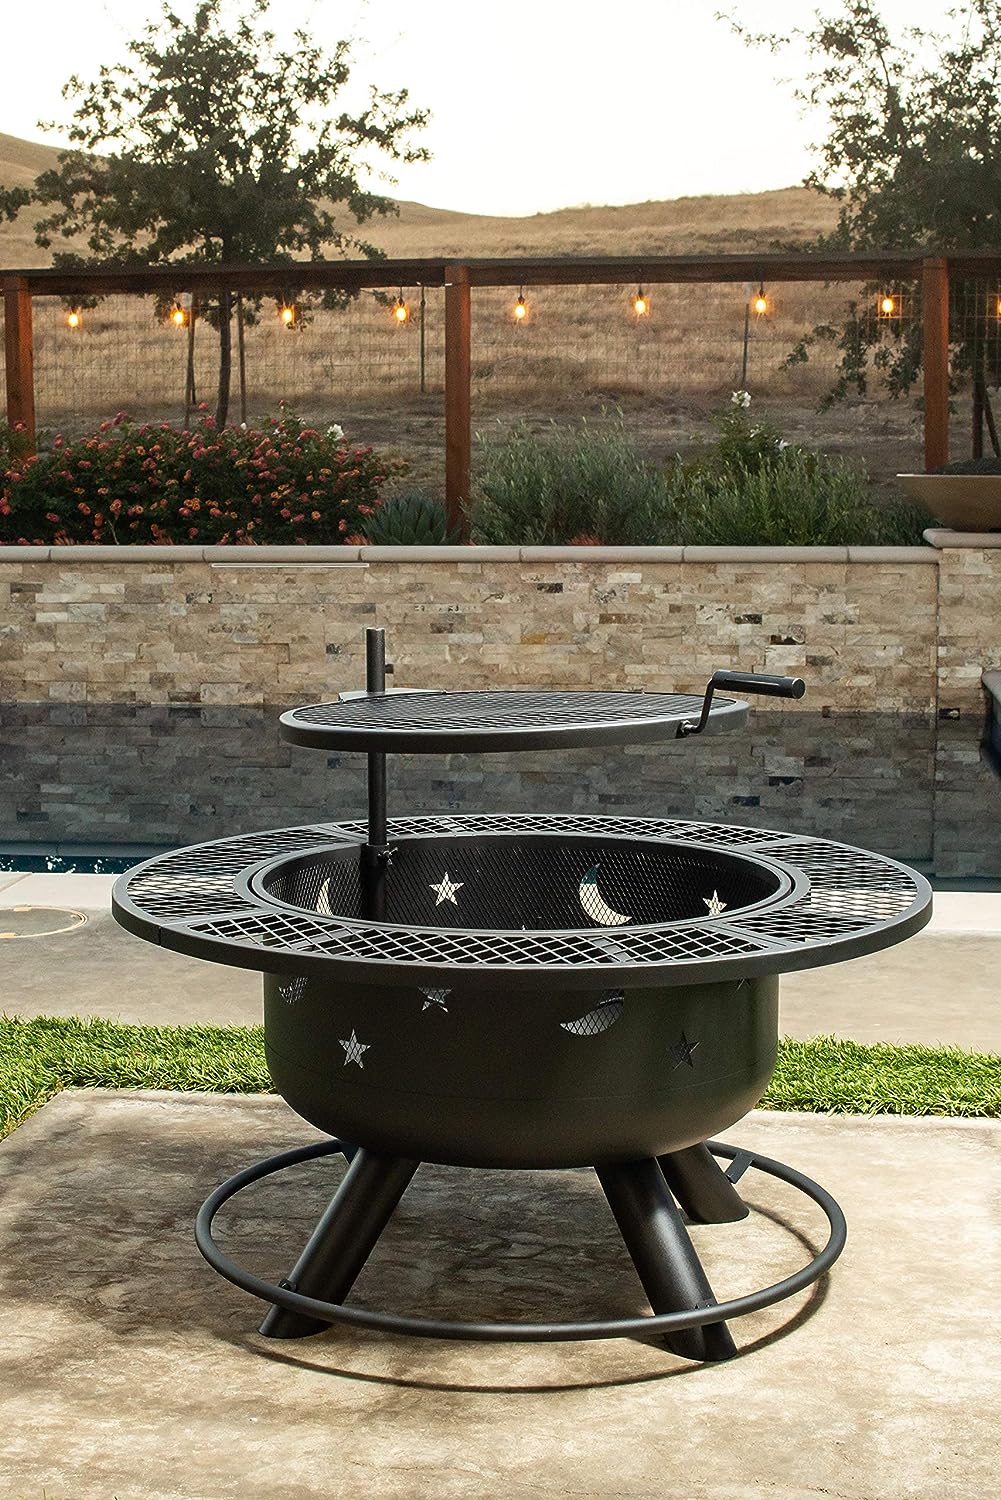 Bond Manufacturing 52124 Nightstar 32.7" Round Wood Burning Steel Fire Pit with Grill, Black